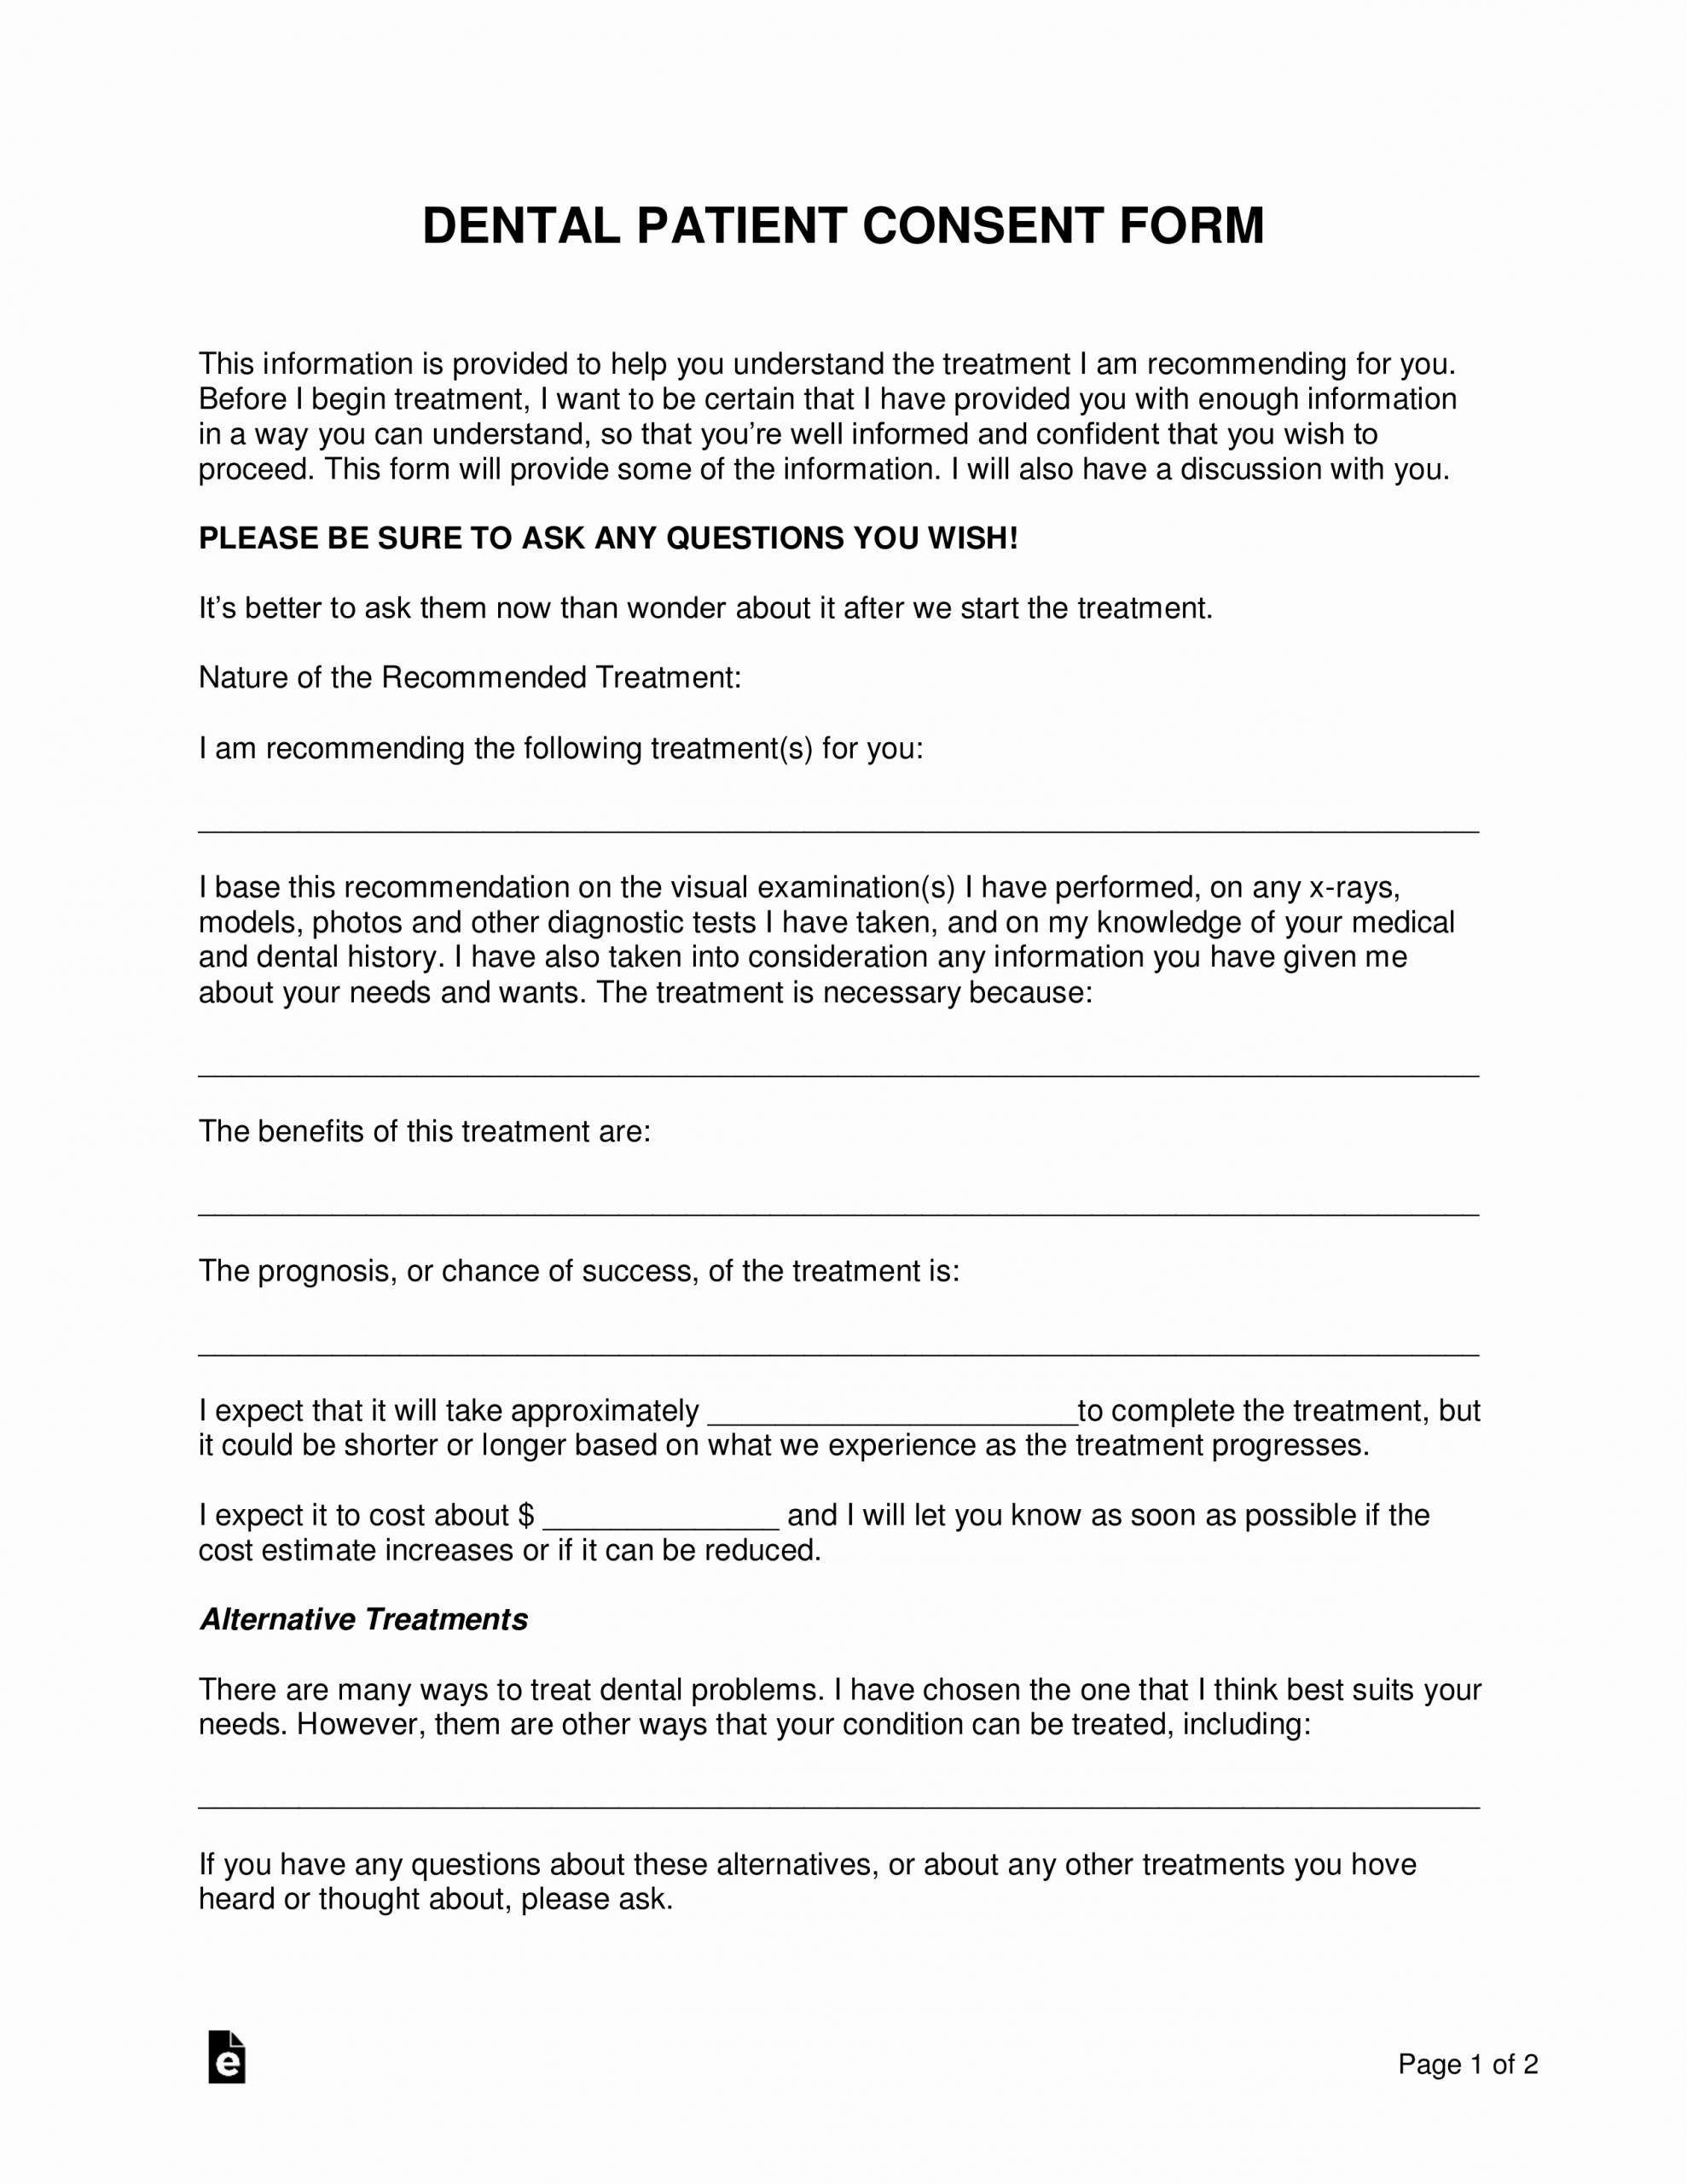 Dental Treatment Consent form Template Best Of Free Dental Patient Consent form Word Pdf